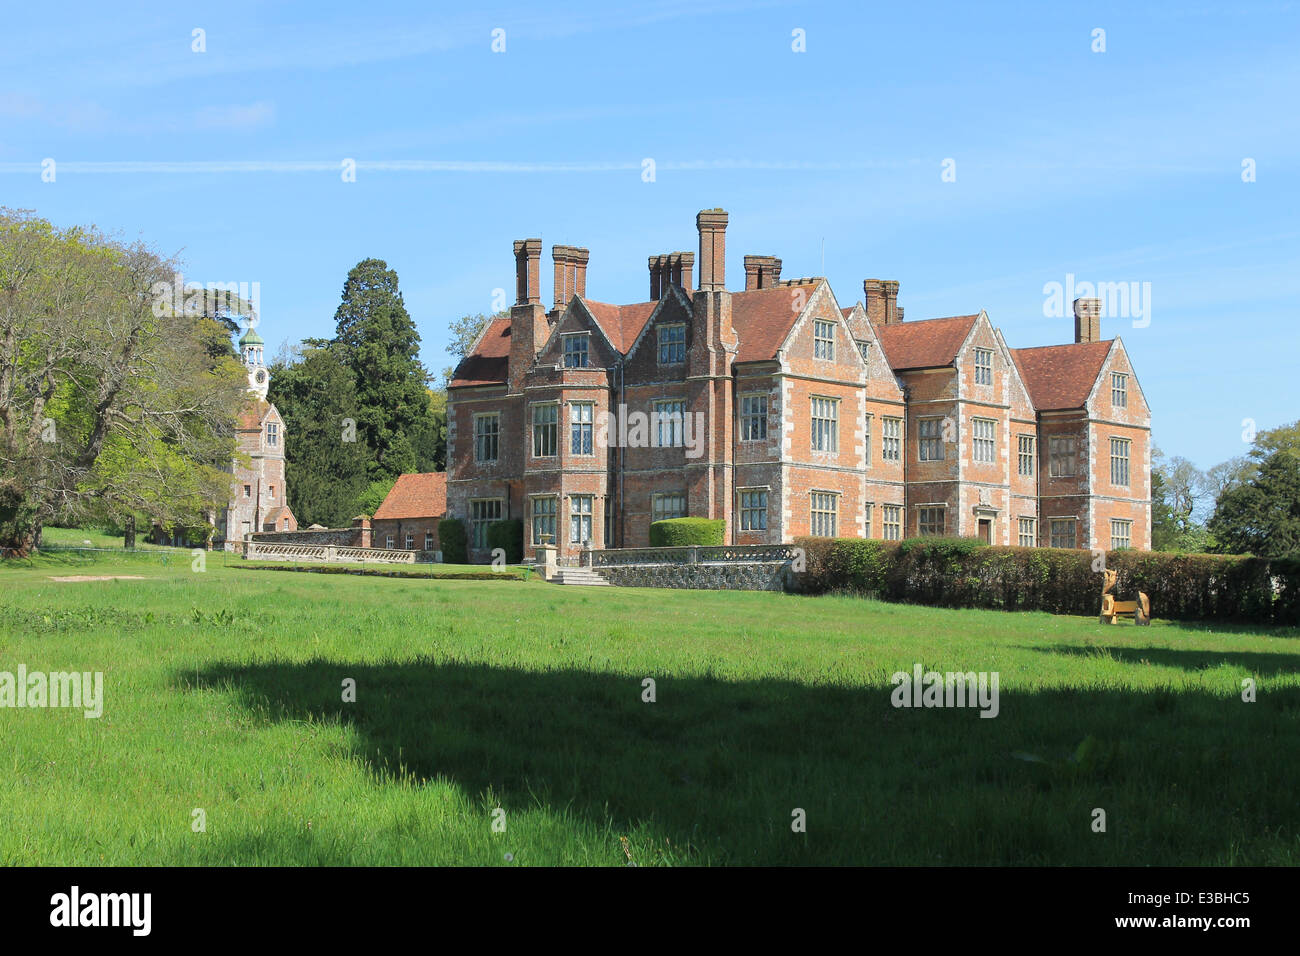 Breamore House, an Elizabethan Manor House, Breamore, Hampshire, UK Stock Photo